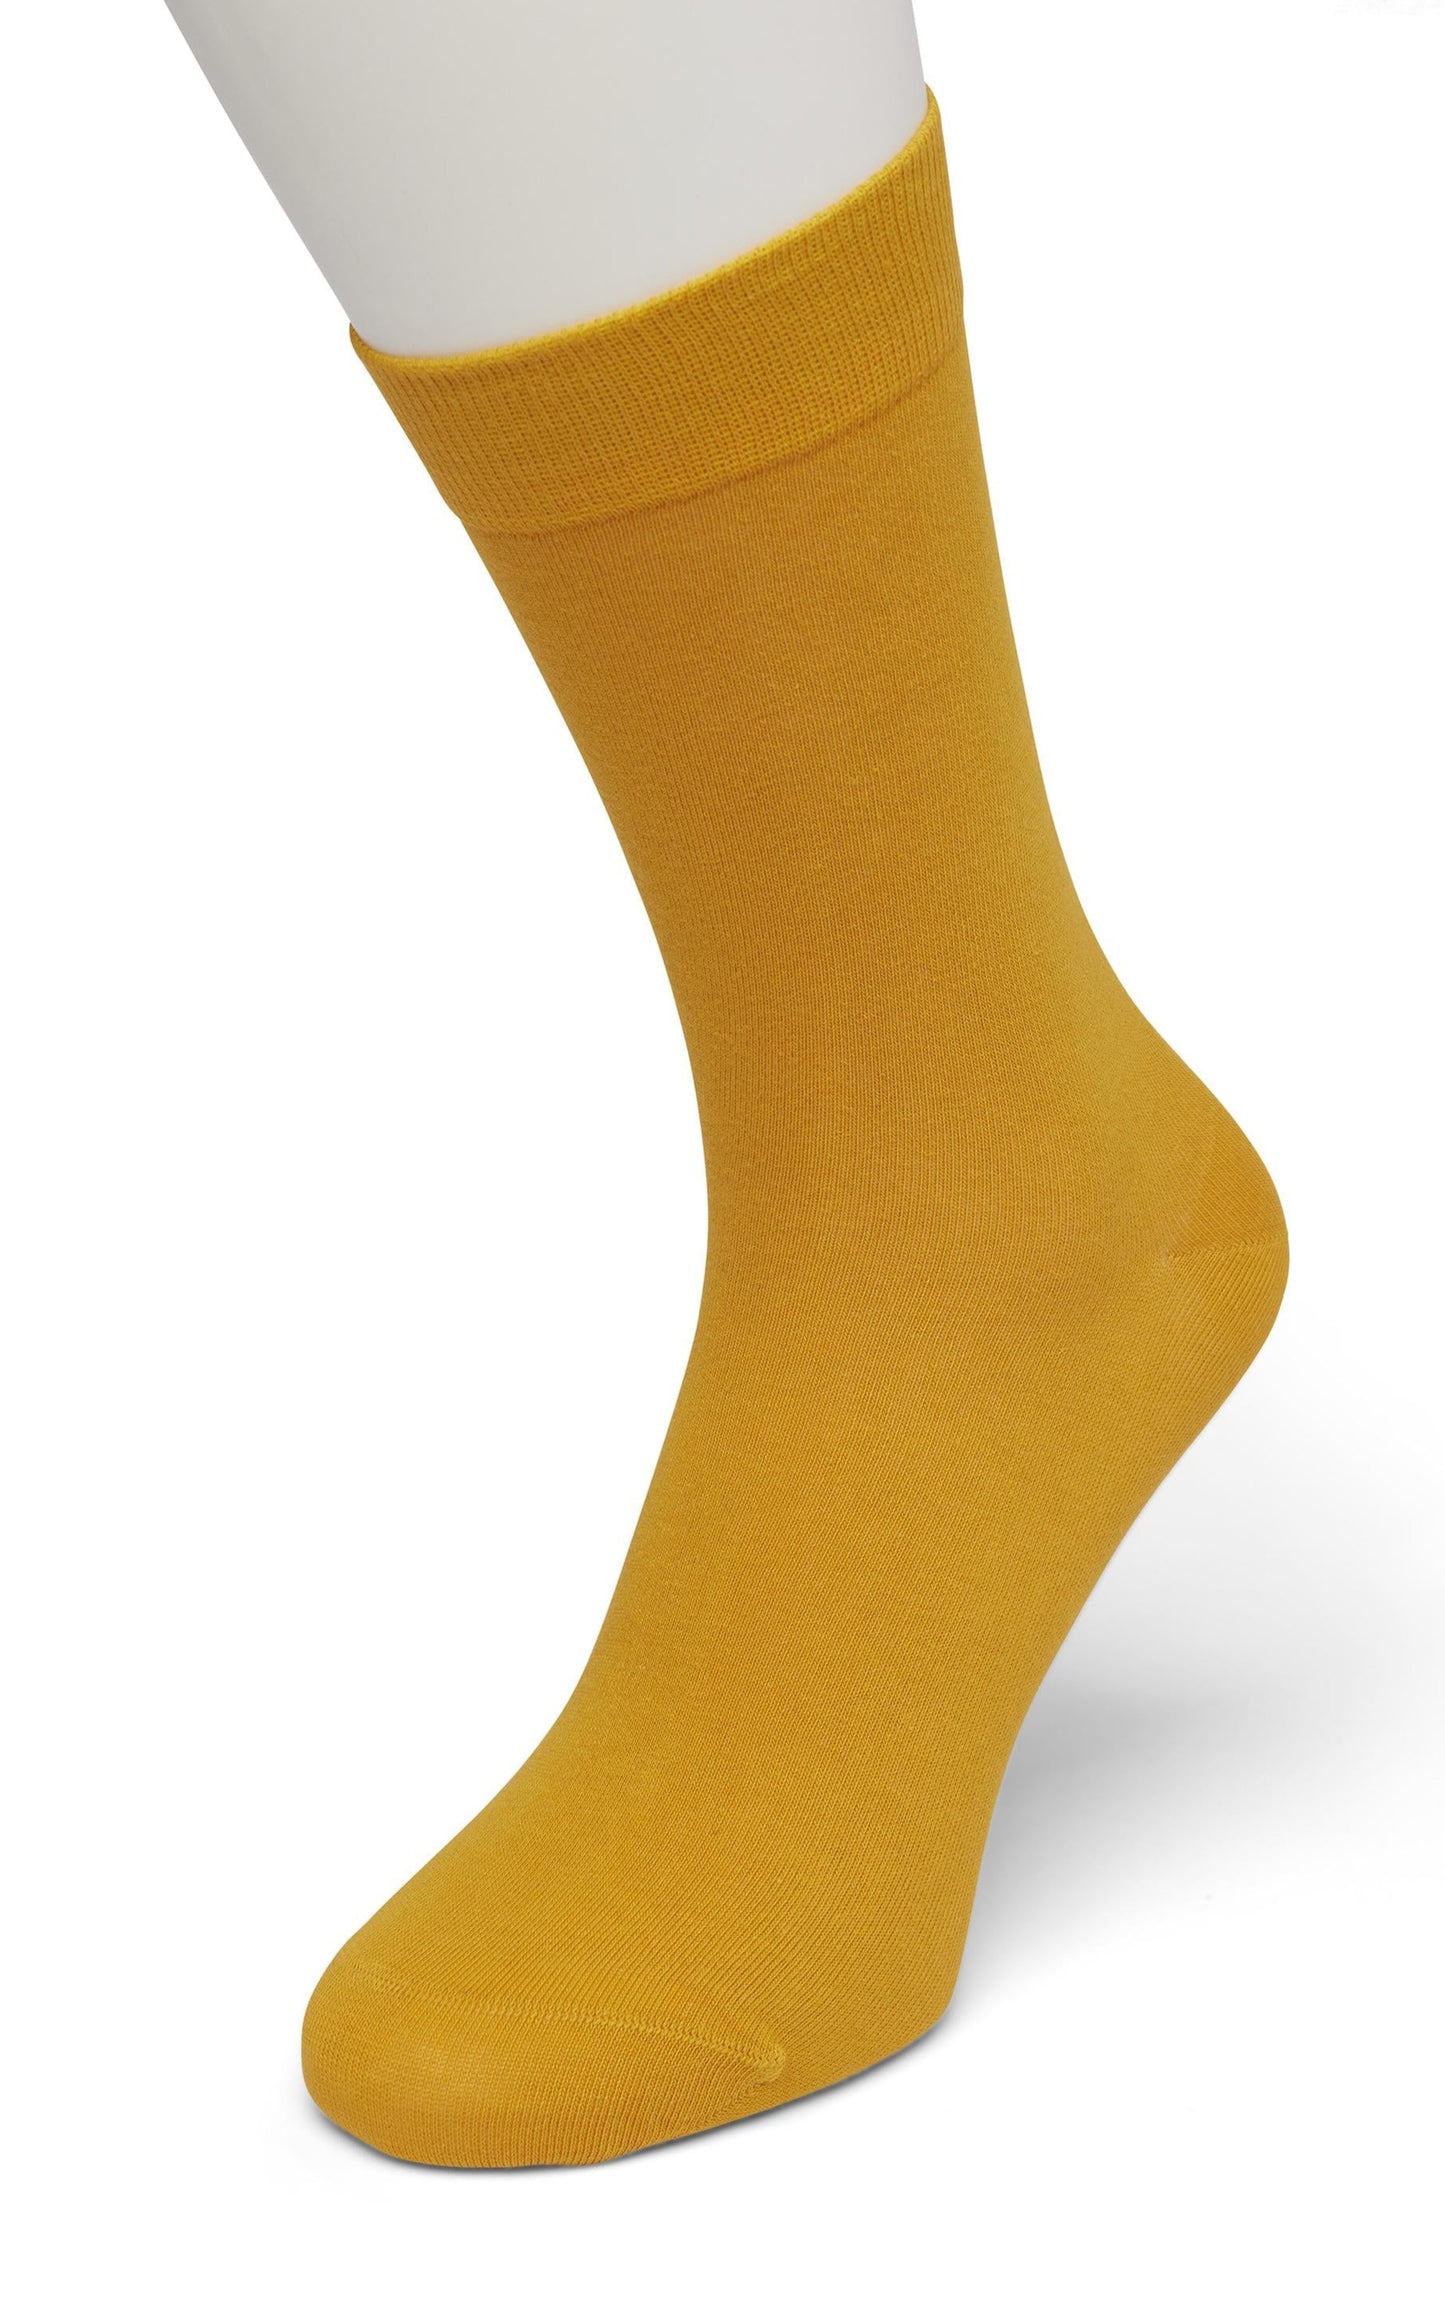 Bonnie Doon 83422 / BD632401 Cotton Sock -  Dark Mustard (mineral yellow) ankle socks available in men and women sizes